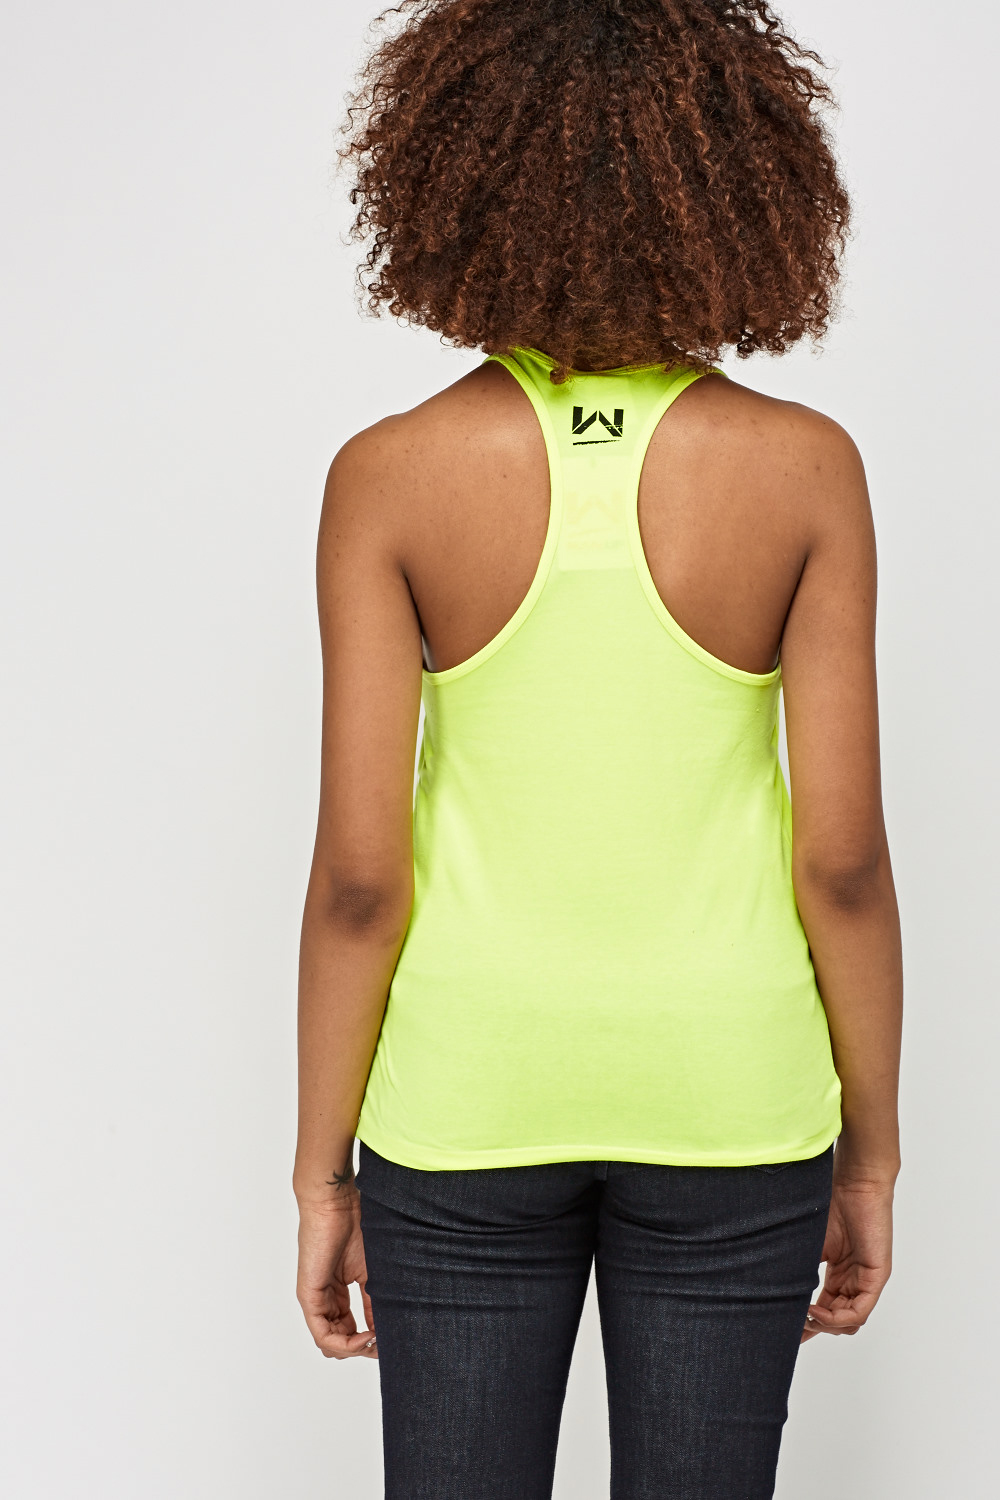 Yellow Sports Tank Top - Just $7